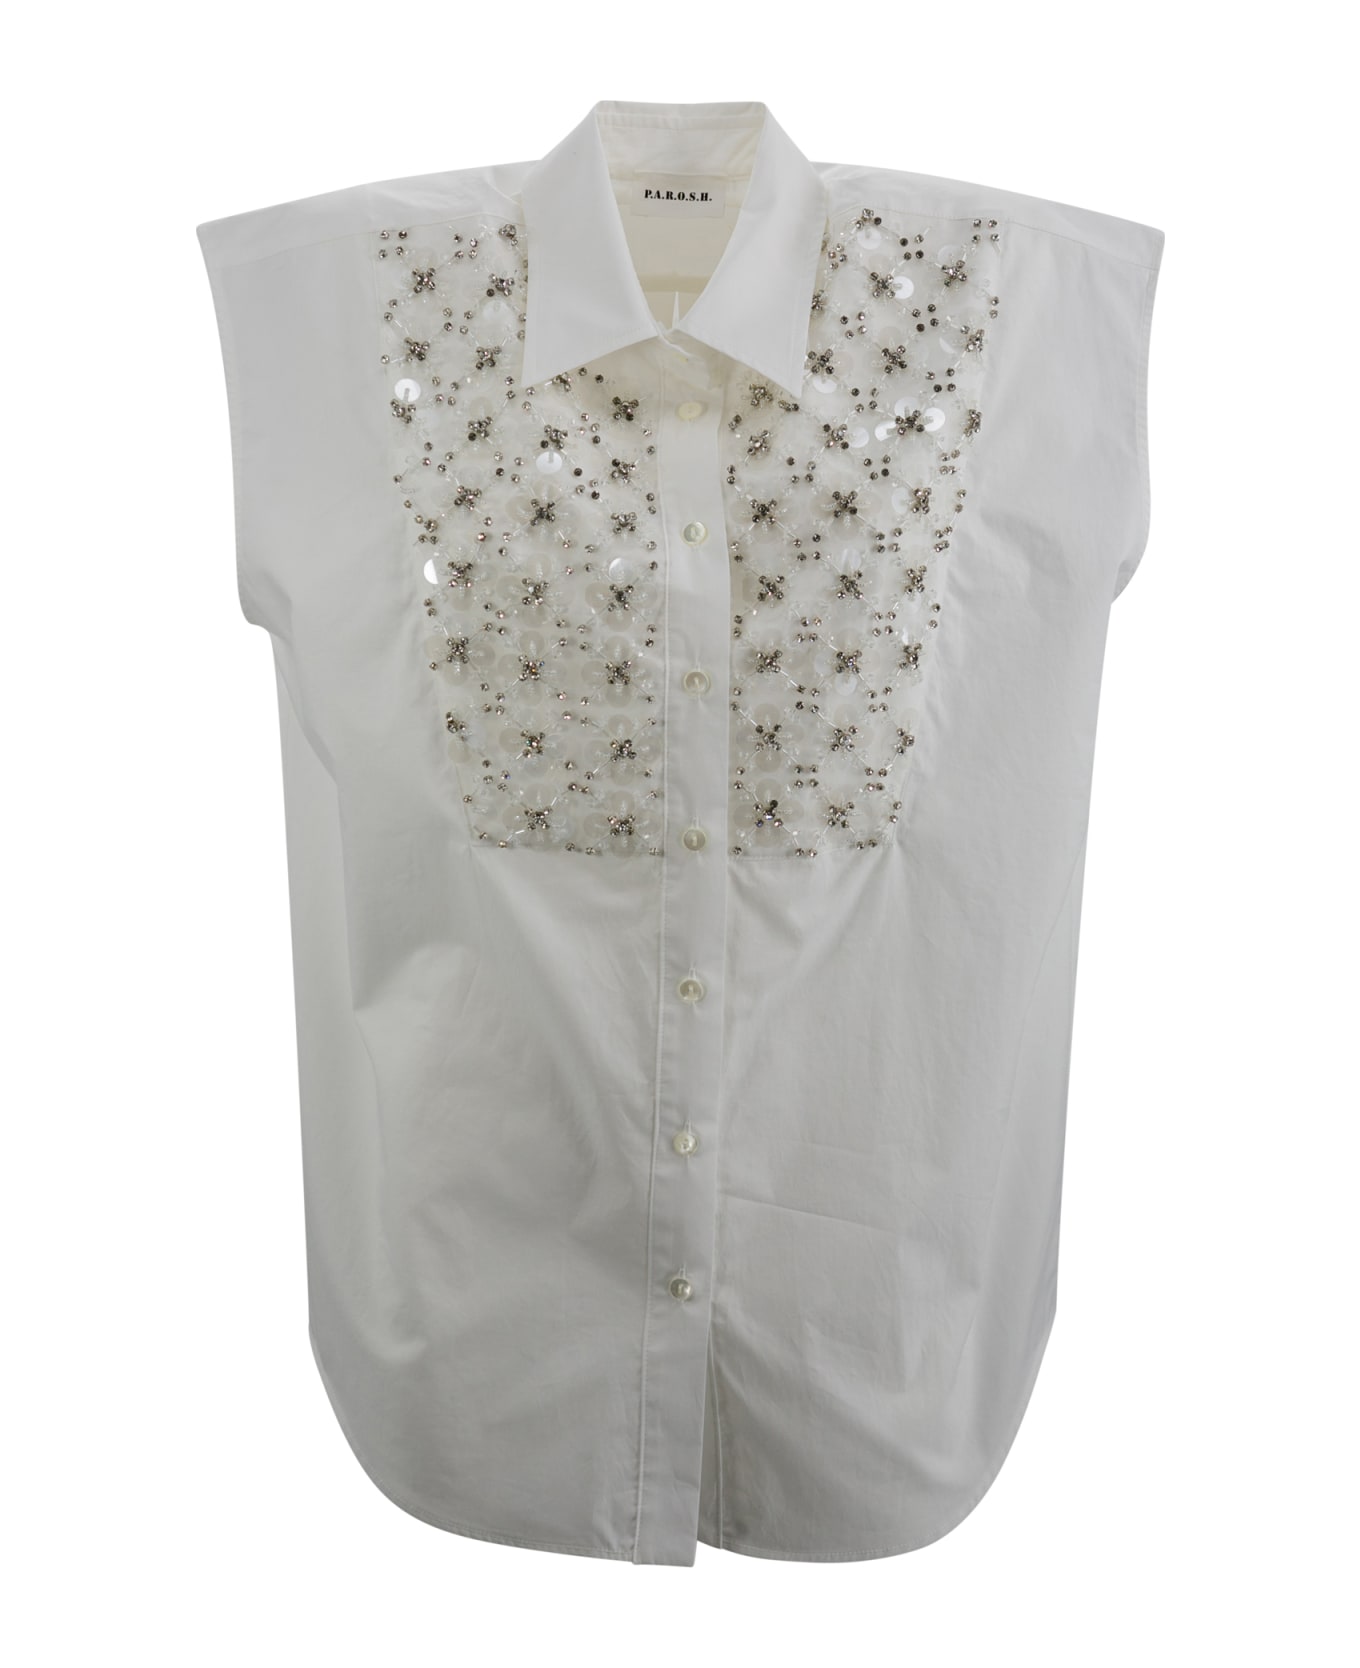 Parosh Shirt With Sequin Embroidery - White シャツ